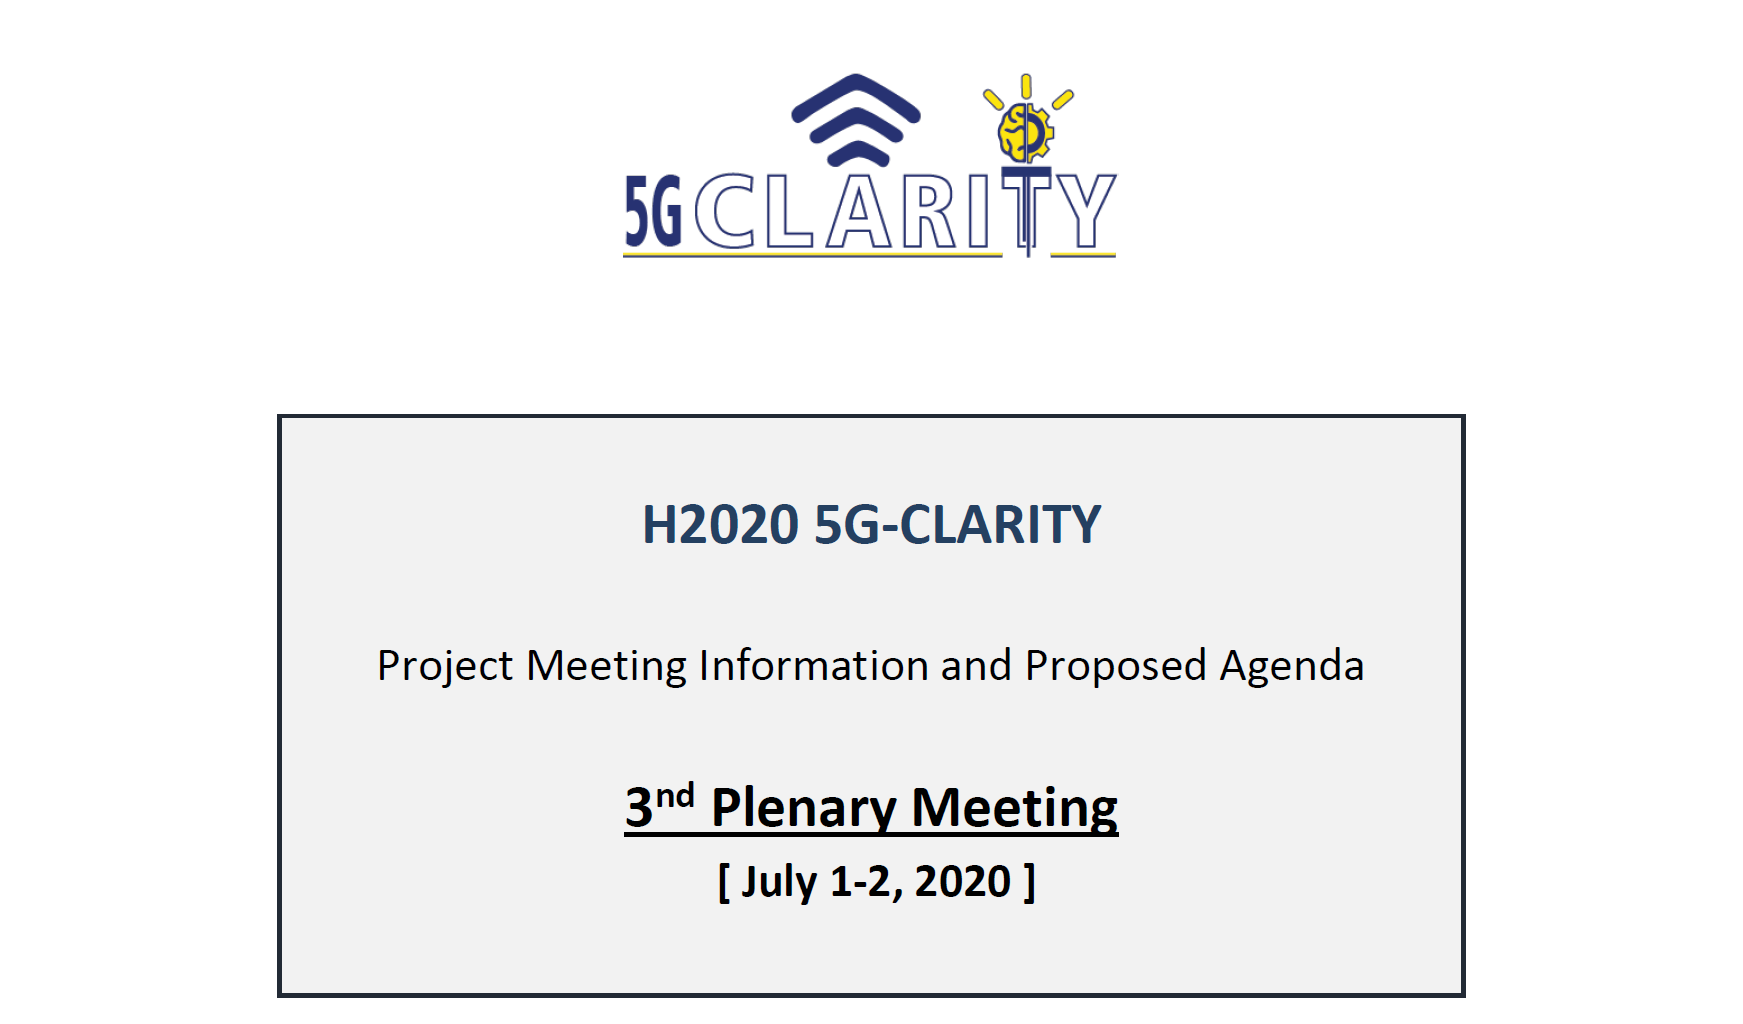 5G-CLARITY 3rd Plenary Meeting to be held in virtual (remotely) format on July 1st and 2nd, 2020!